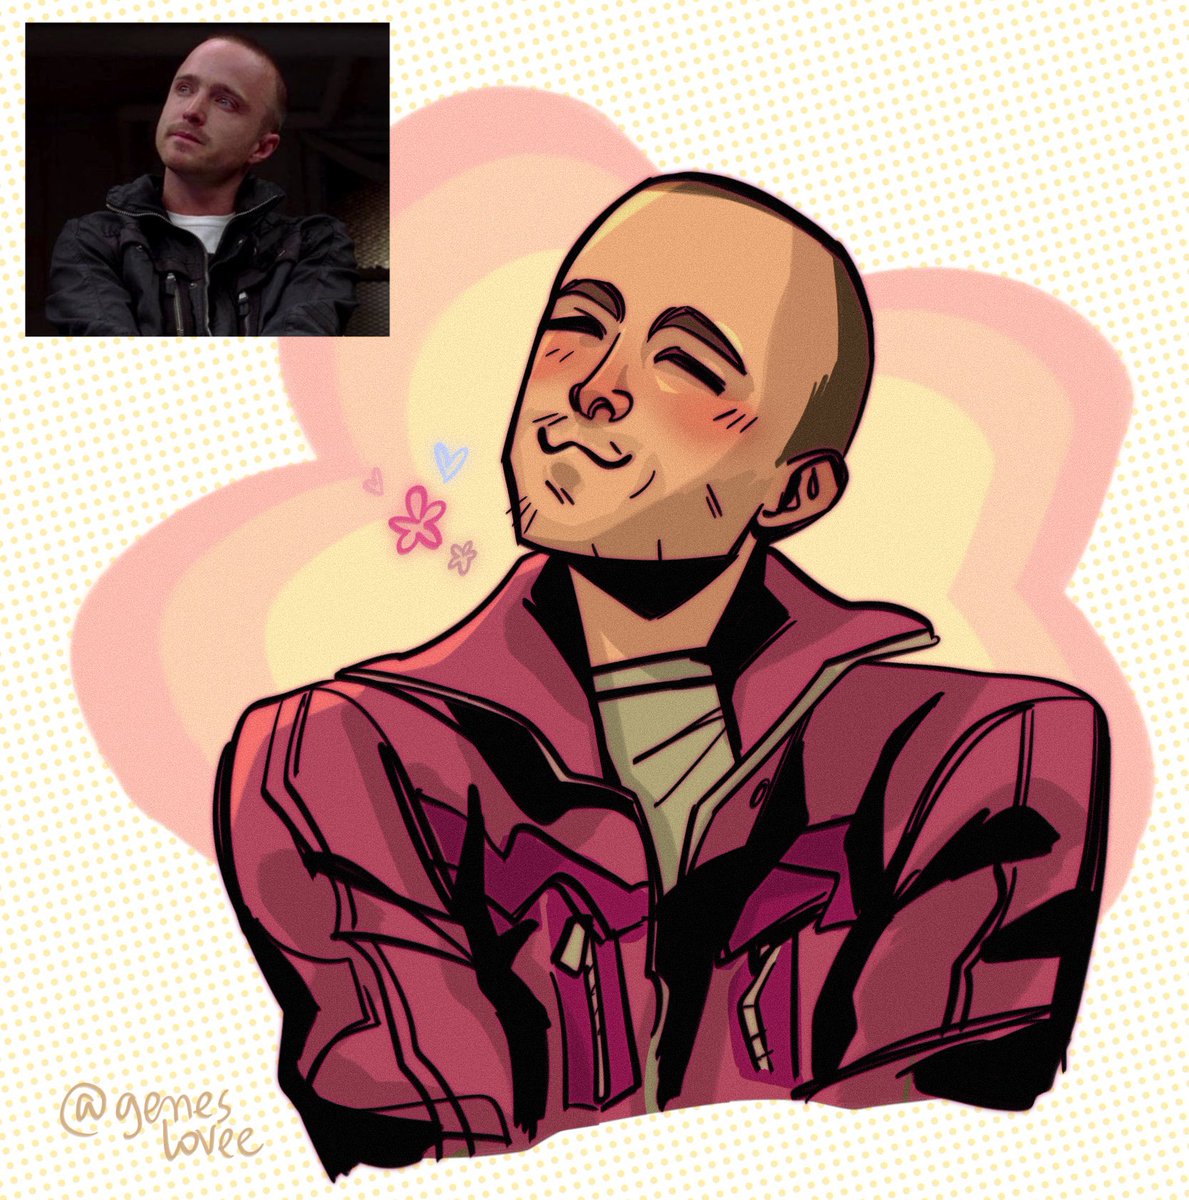 「jesse pinkman you are my favorite anime 」|eugene ^-^ @ comms OPENのイラスト